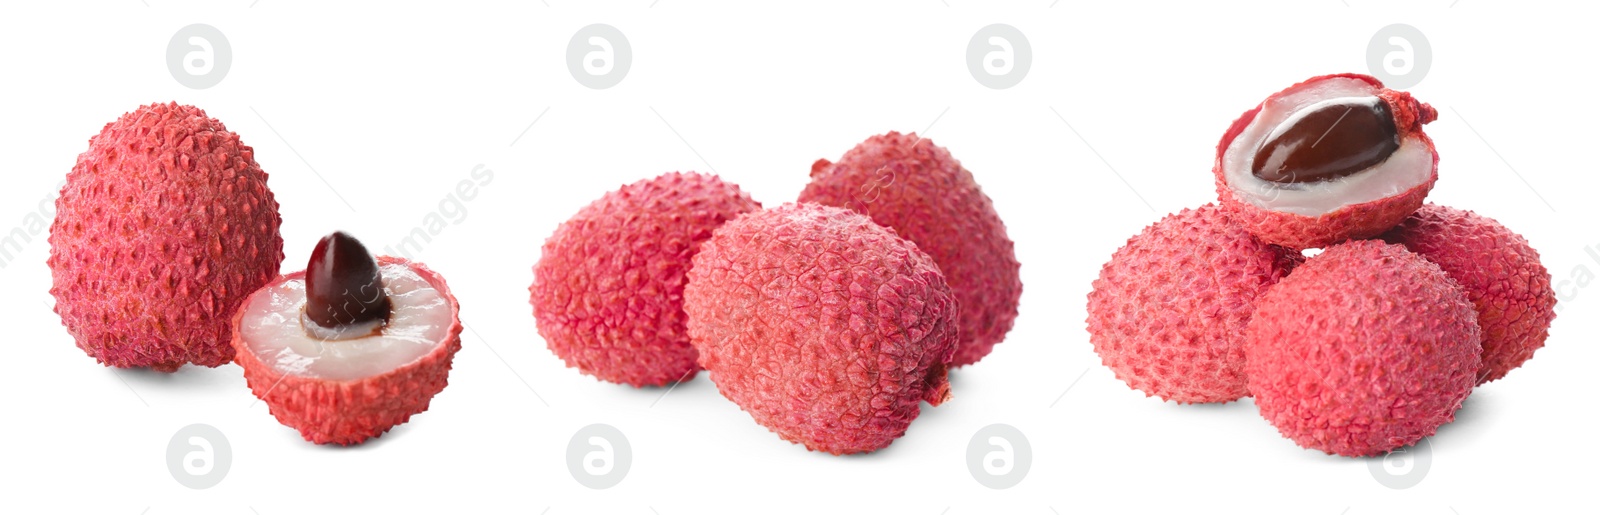 Image of Set of delicious fresh lychees on white background. Banner design 